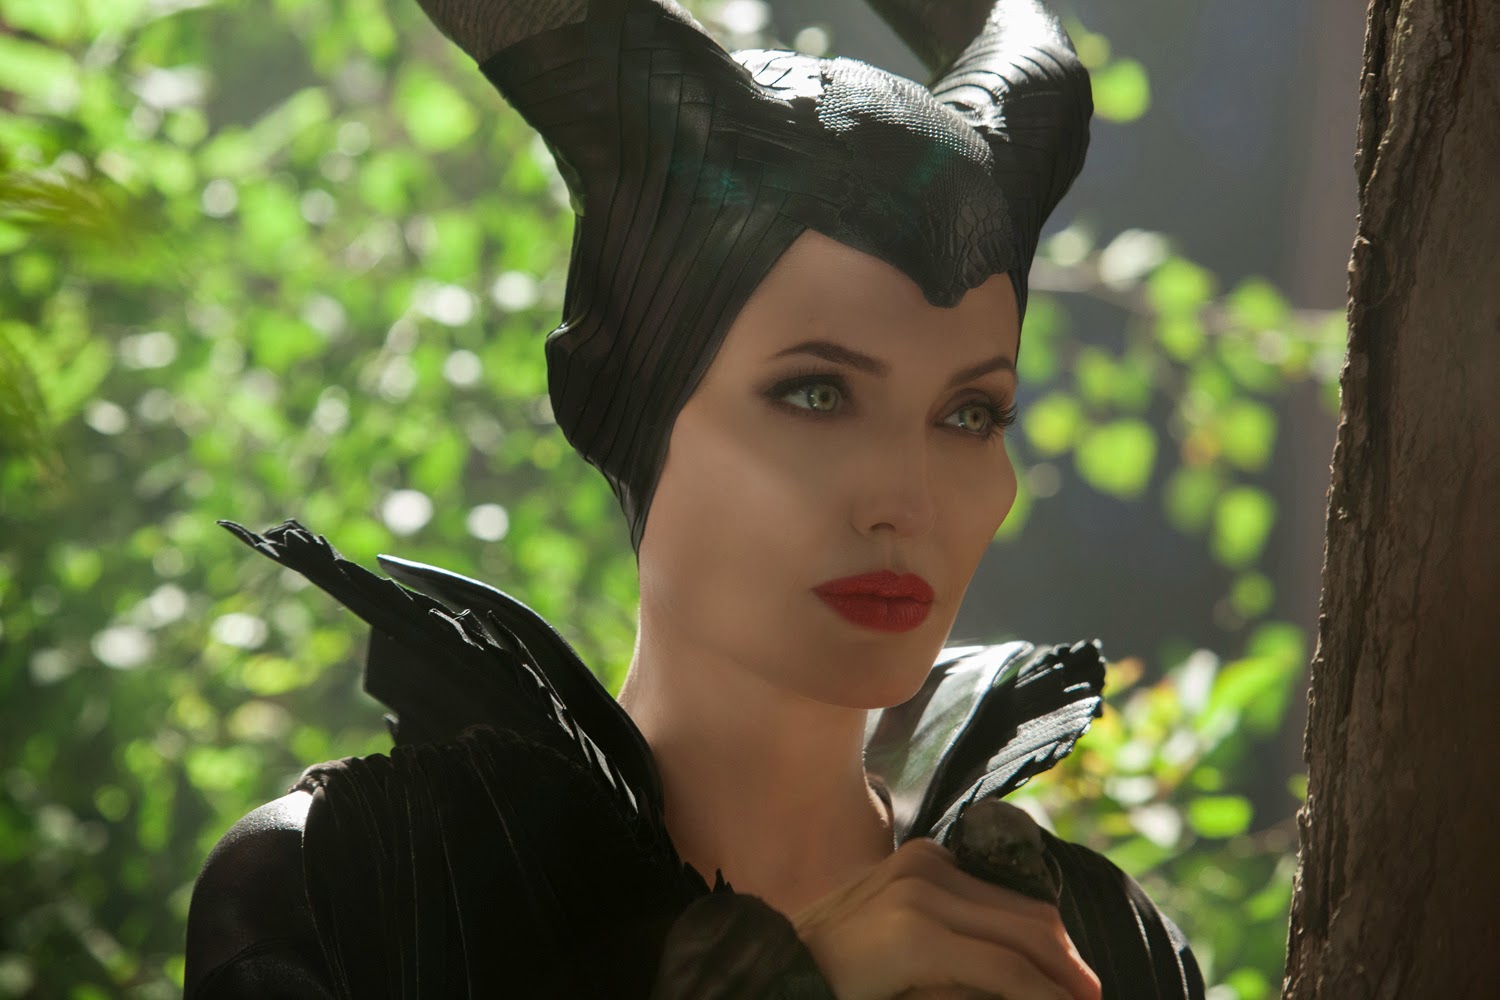 movie review of maleficent